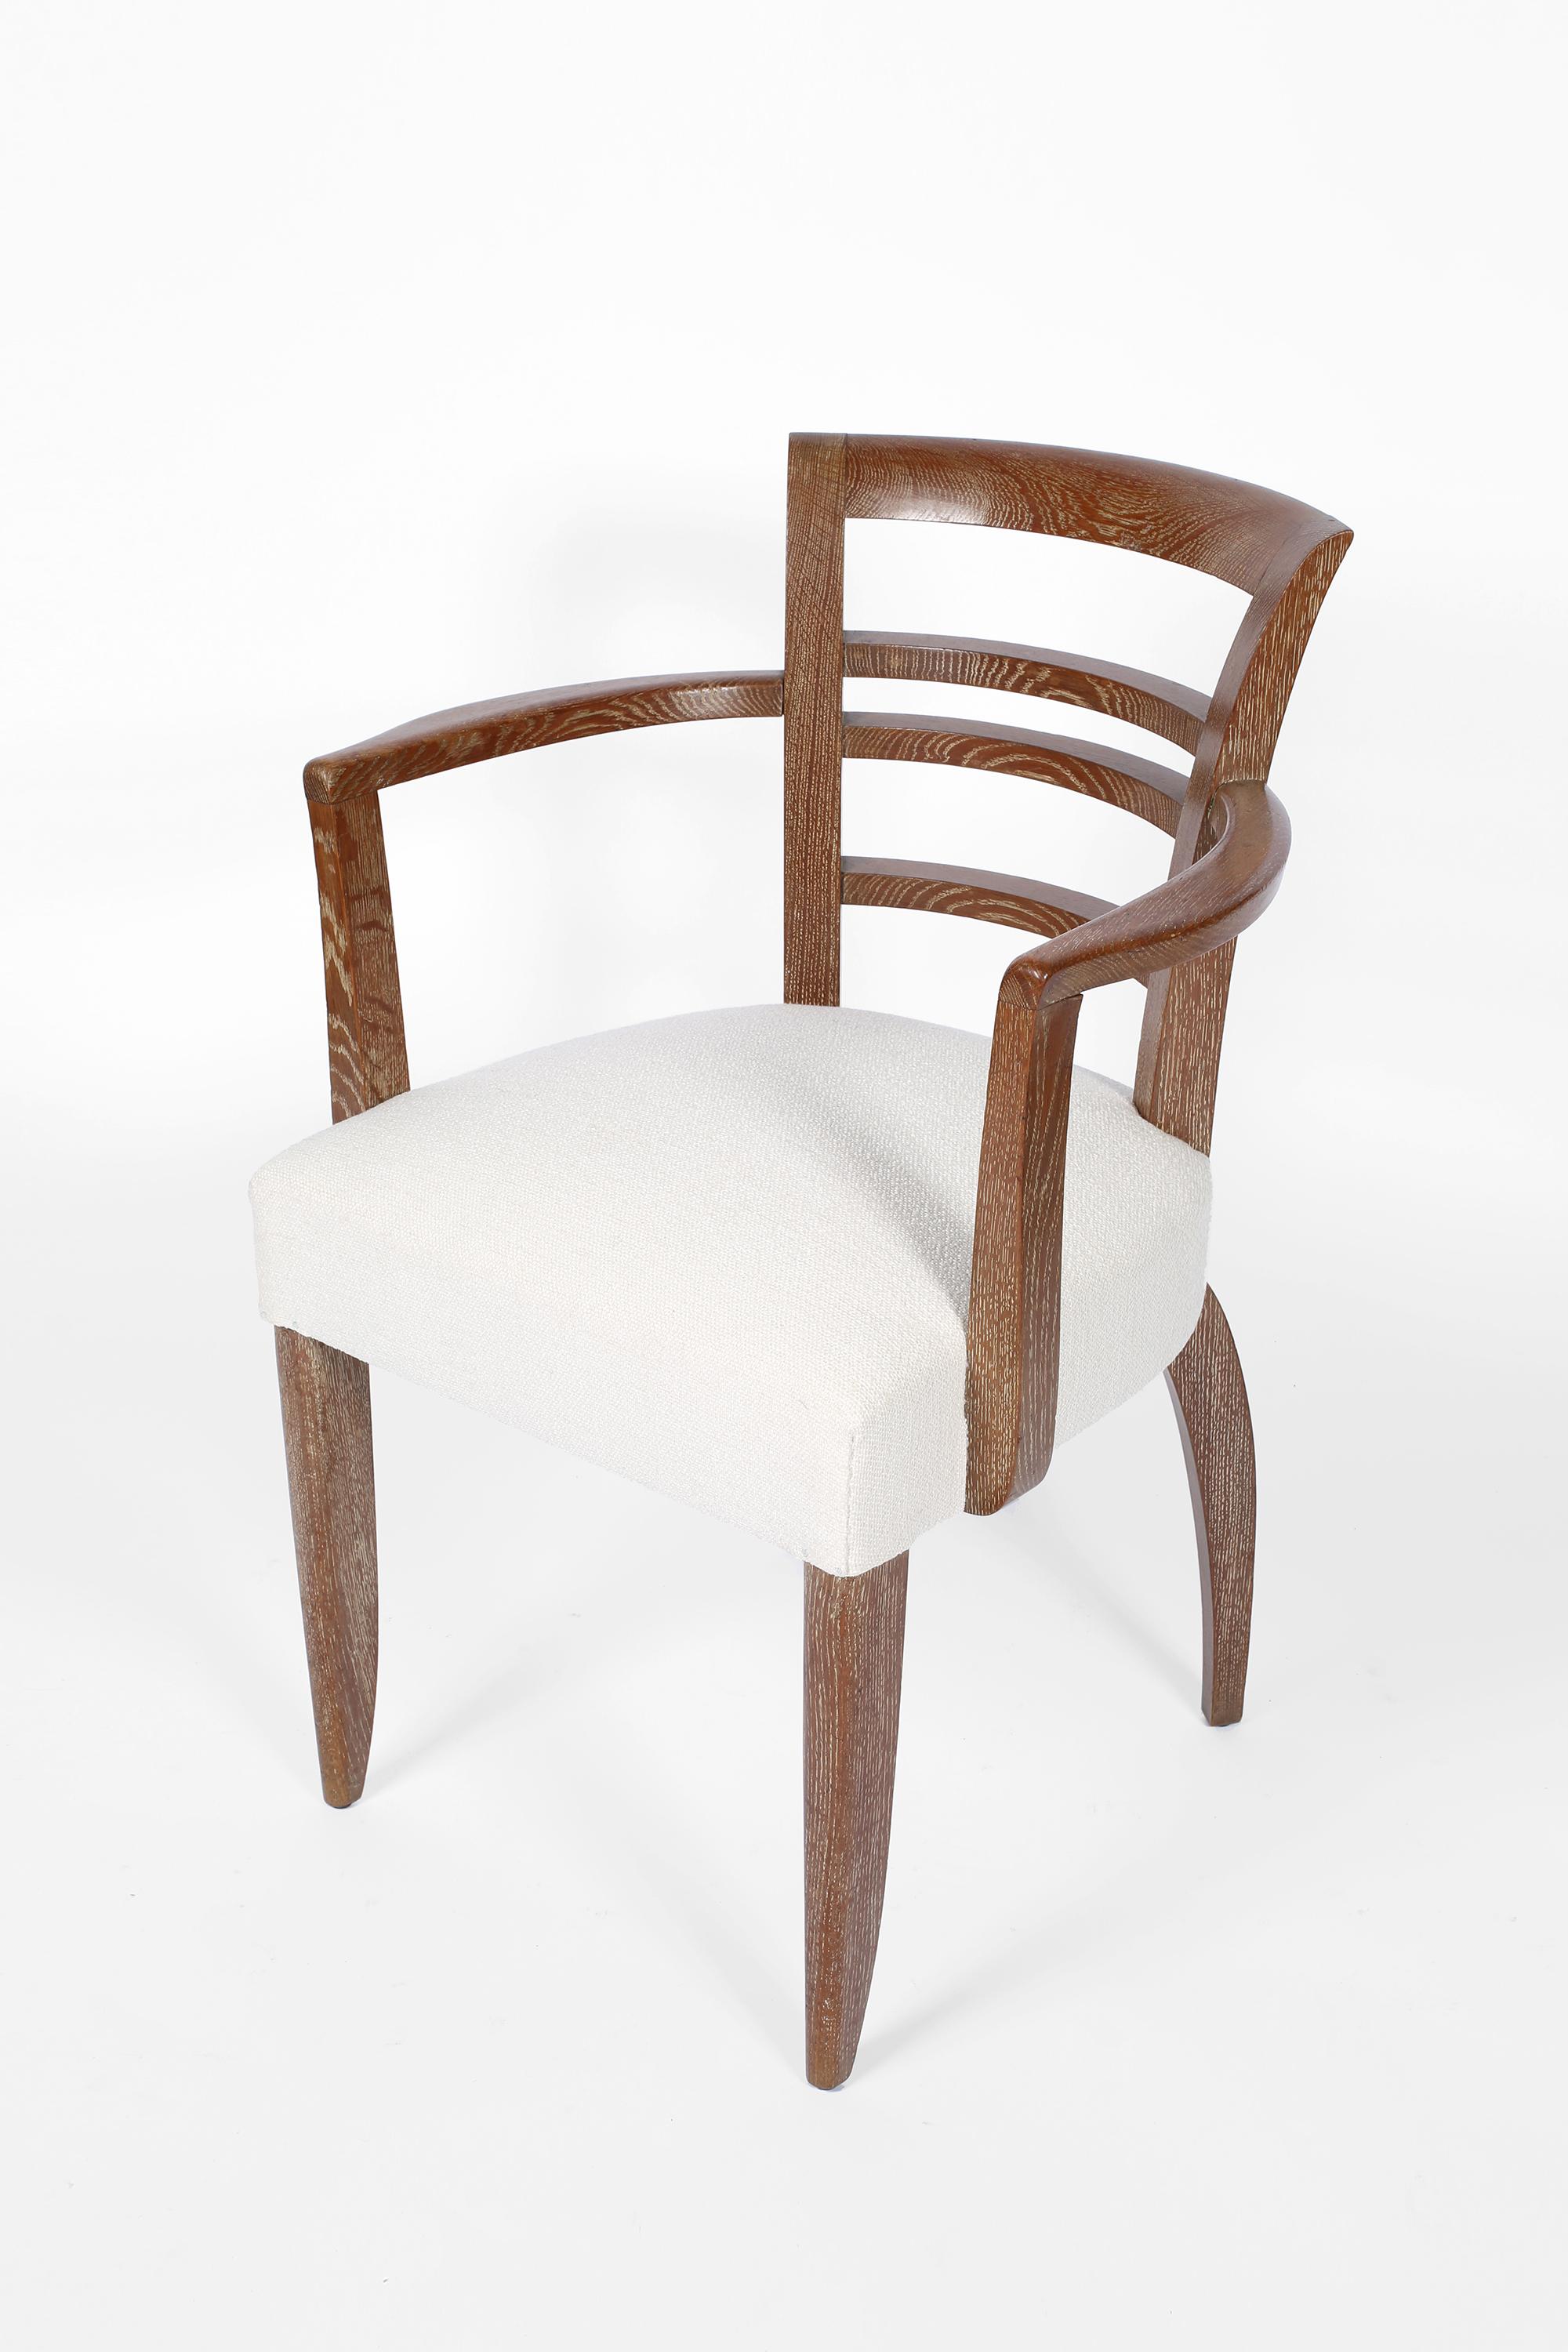 Art Deco occasional chairs with shapely limed oak frames and sprung seats, newly upholstered in textured white linen. French, circa 1940.

Measures: W57.5 x D56 x H81.5 cm 
Seat height 48cm
Arm height 67cm.